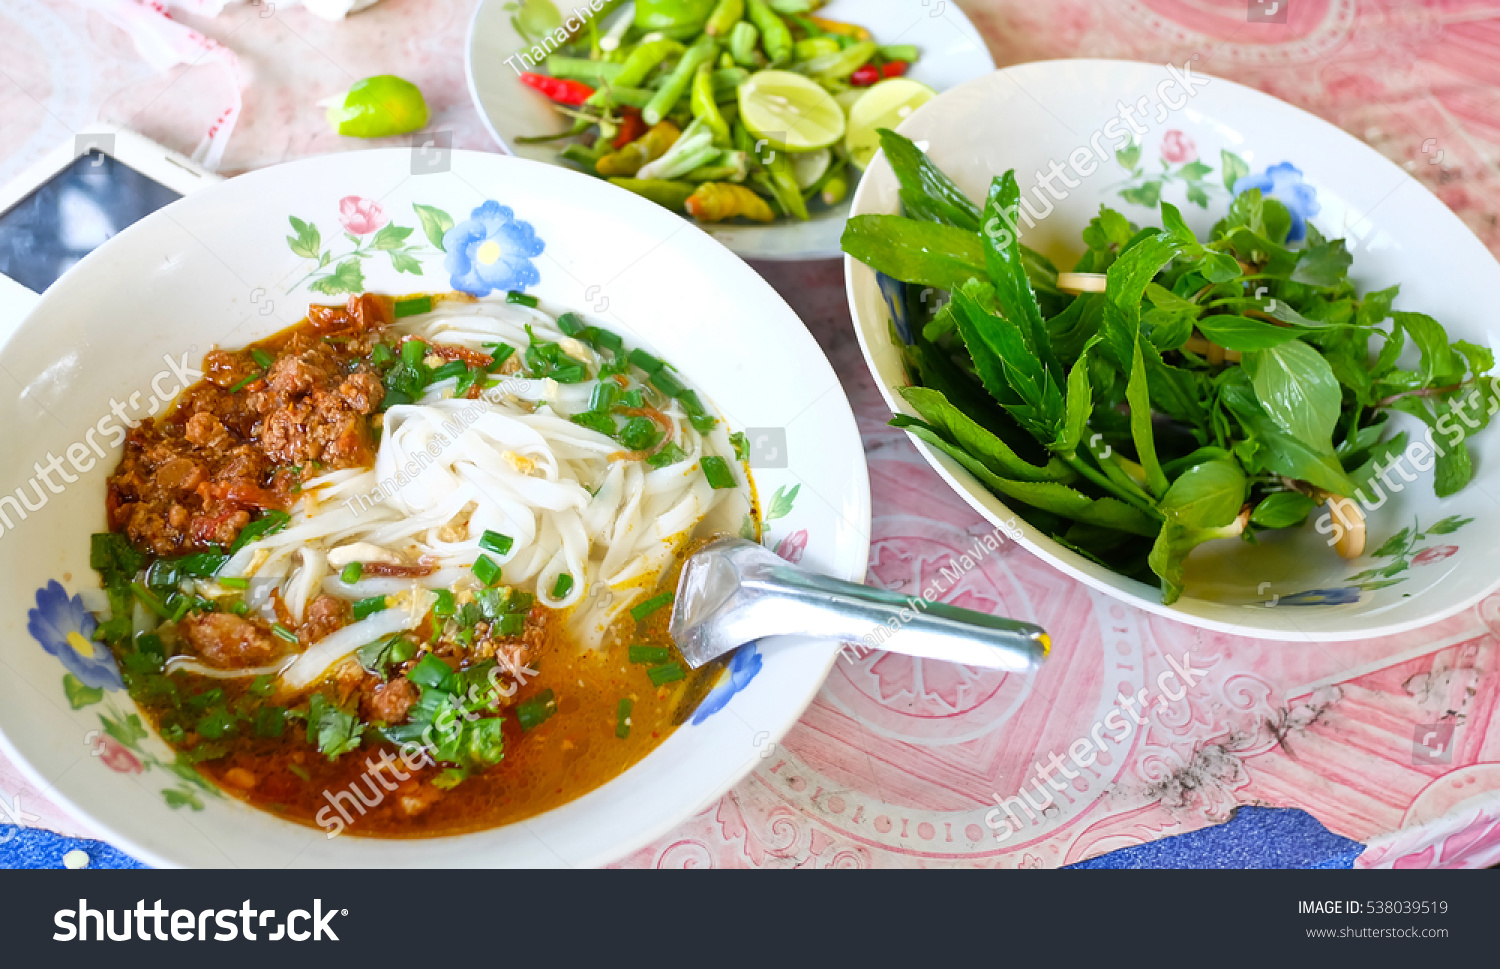 laos food ,Pho, Laos Style Beef Noodle Soup with vegetables on table. #538039519